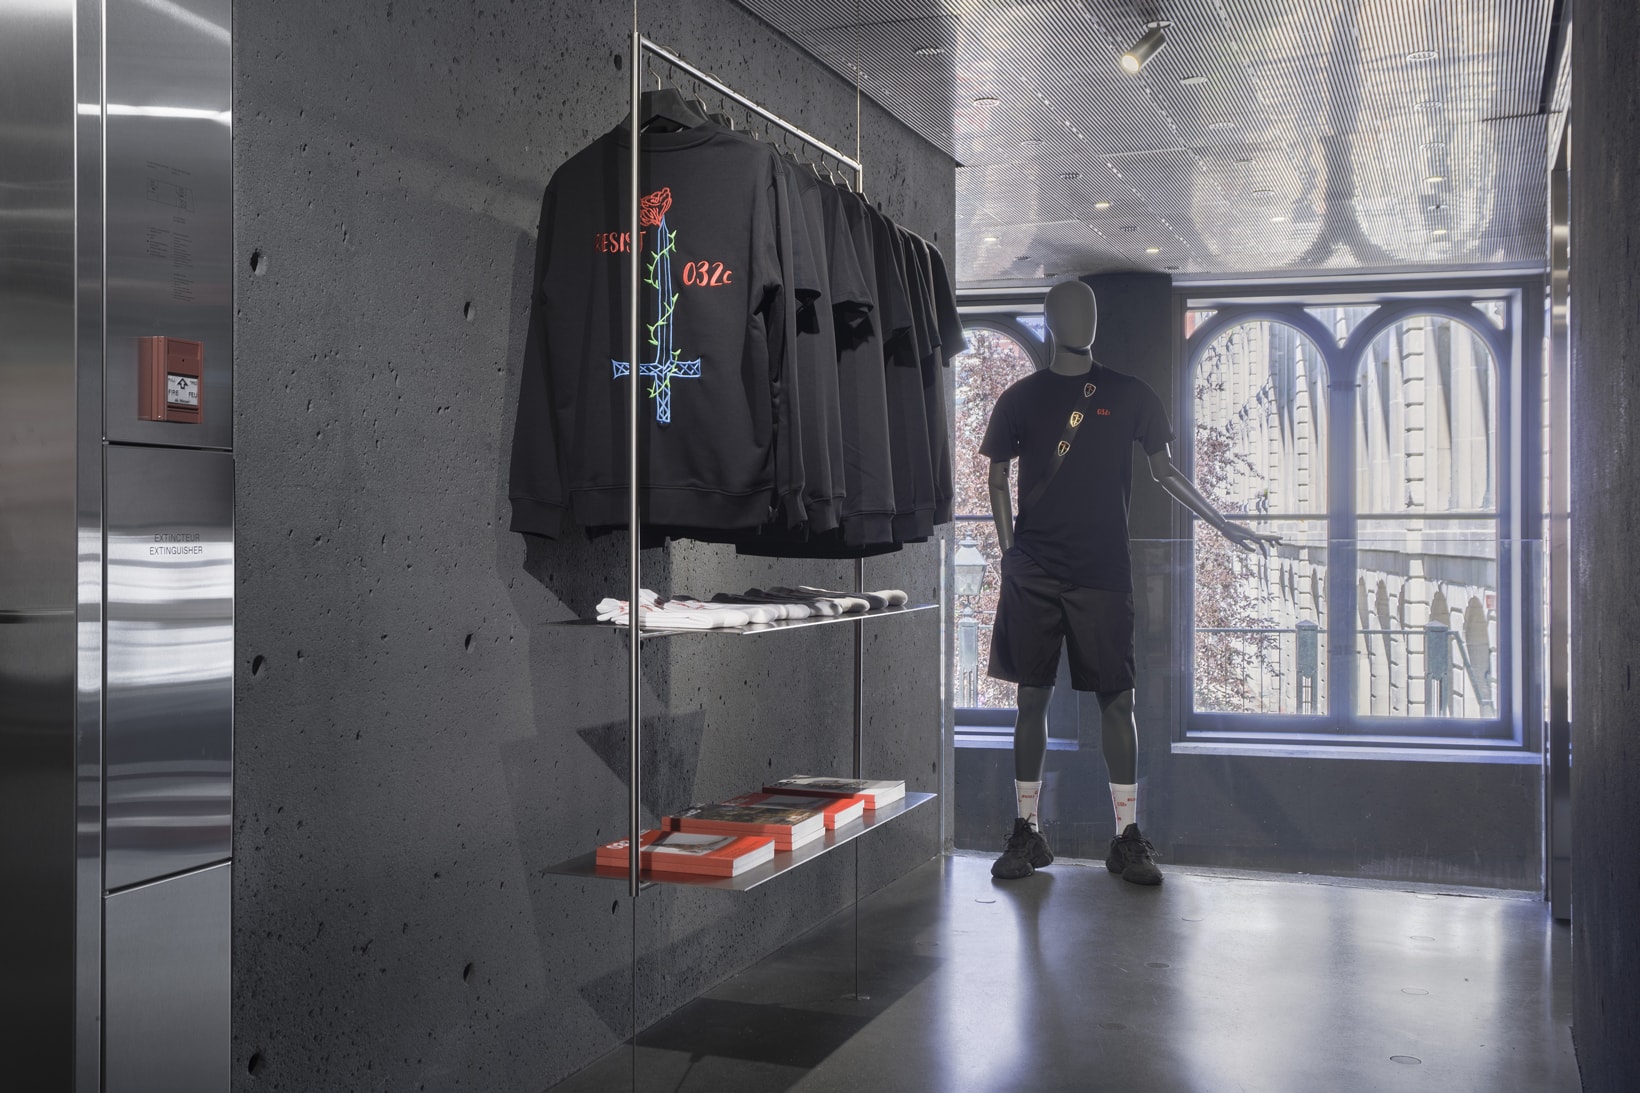 032c ssense montreal the big flat now jonathan castro exhibitions apparel clothing fashion style graphic design